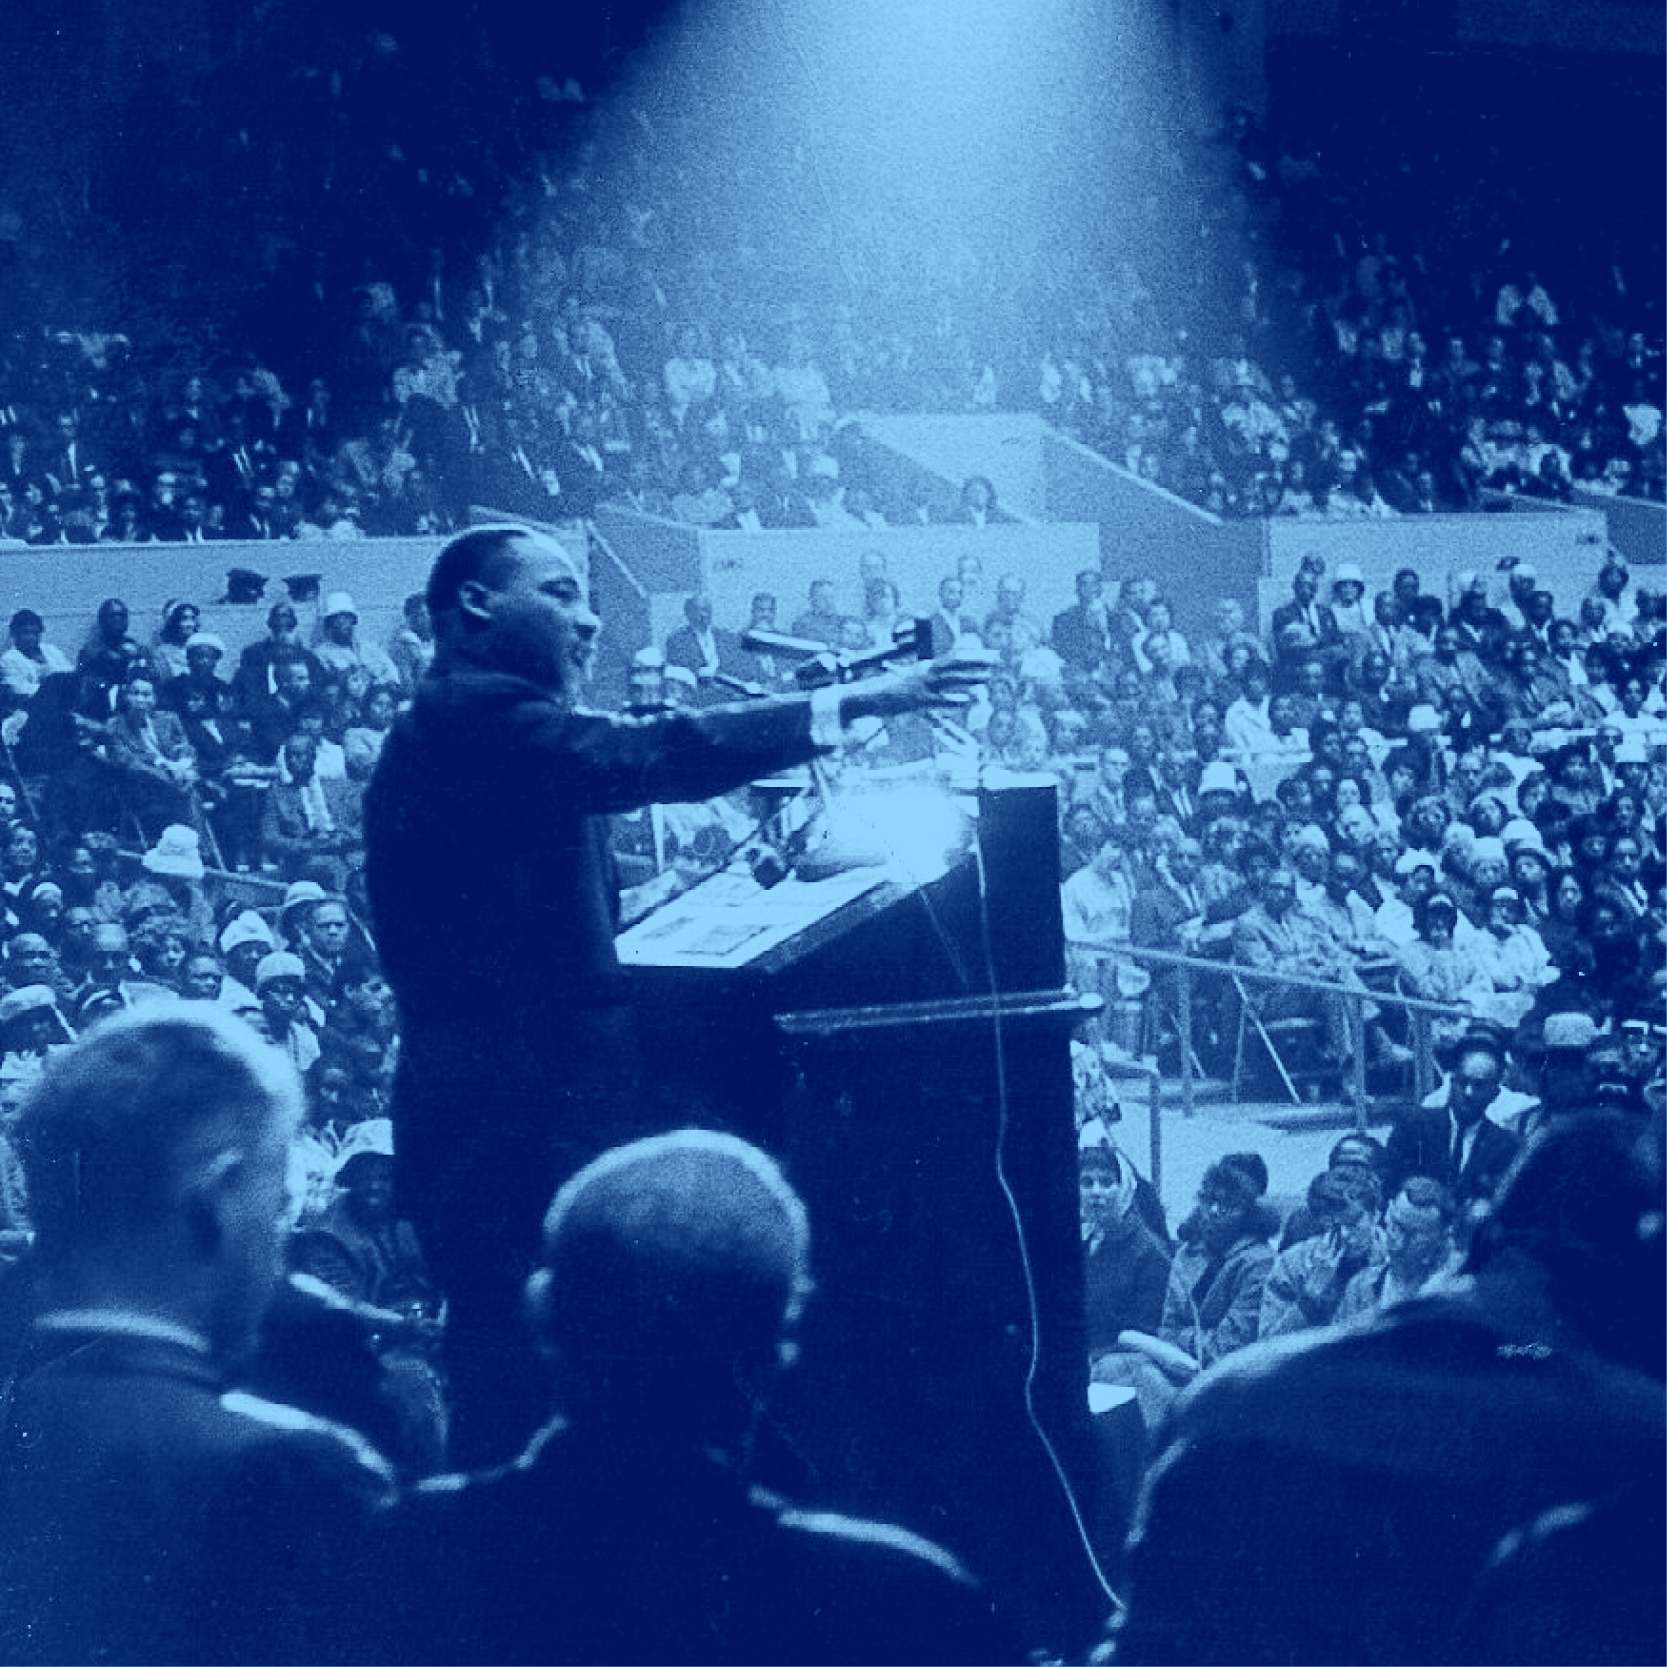 9 Powerful Words From Rev. Dr. Martin Luther King, Jr.